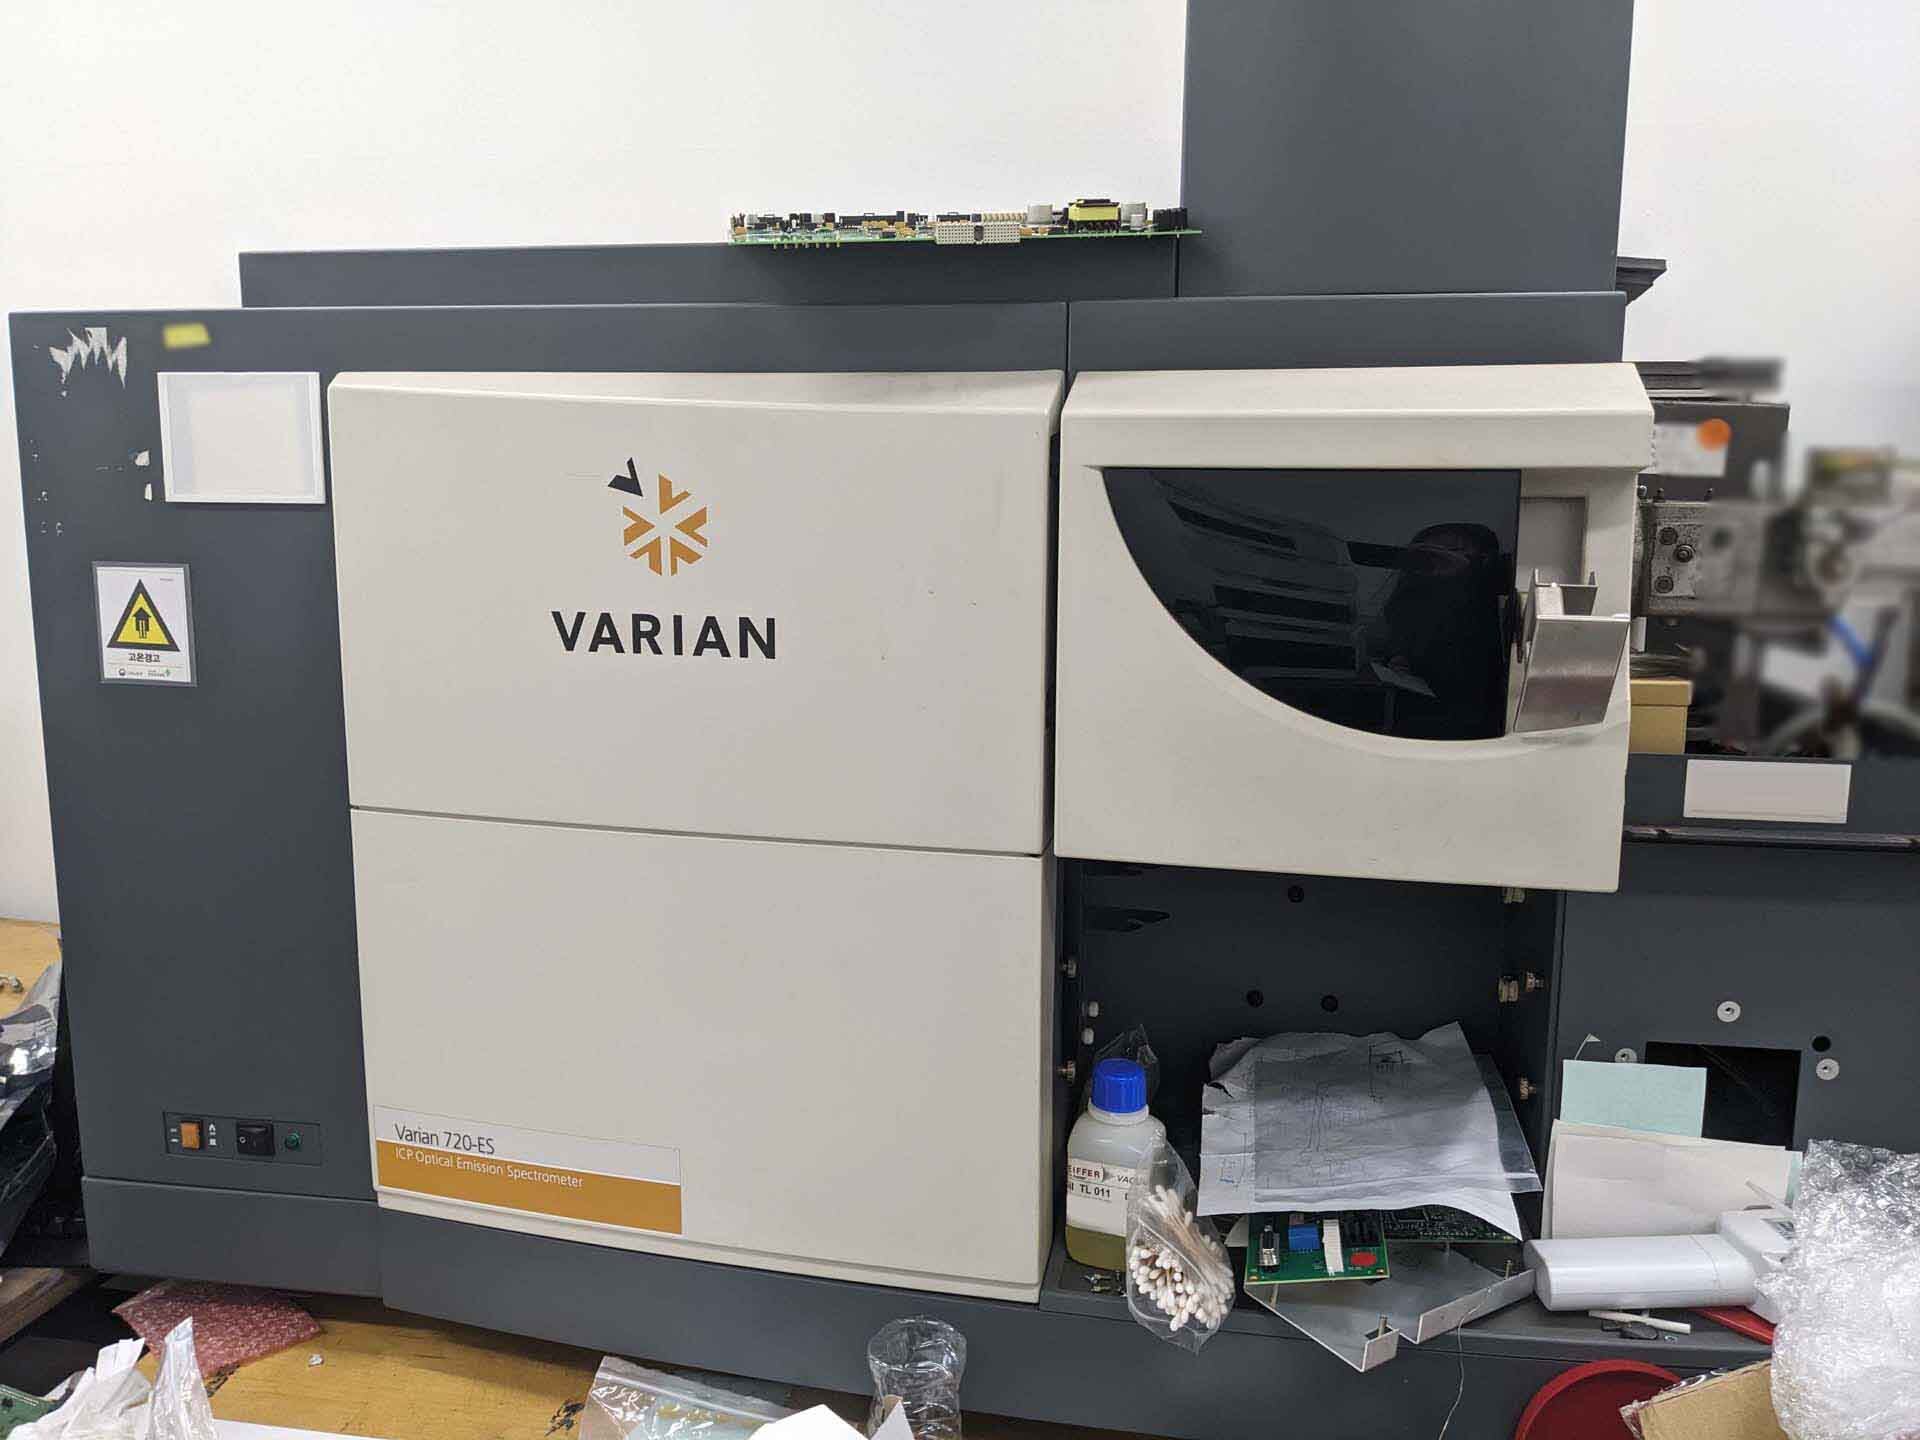 Photo Used VARIAN 720-ES For Sale